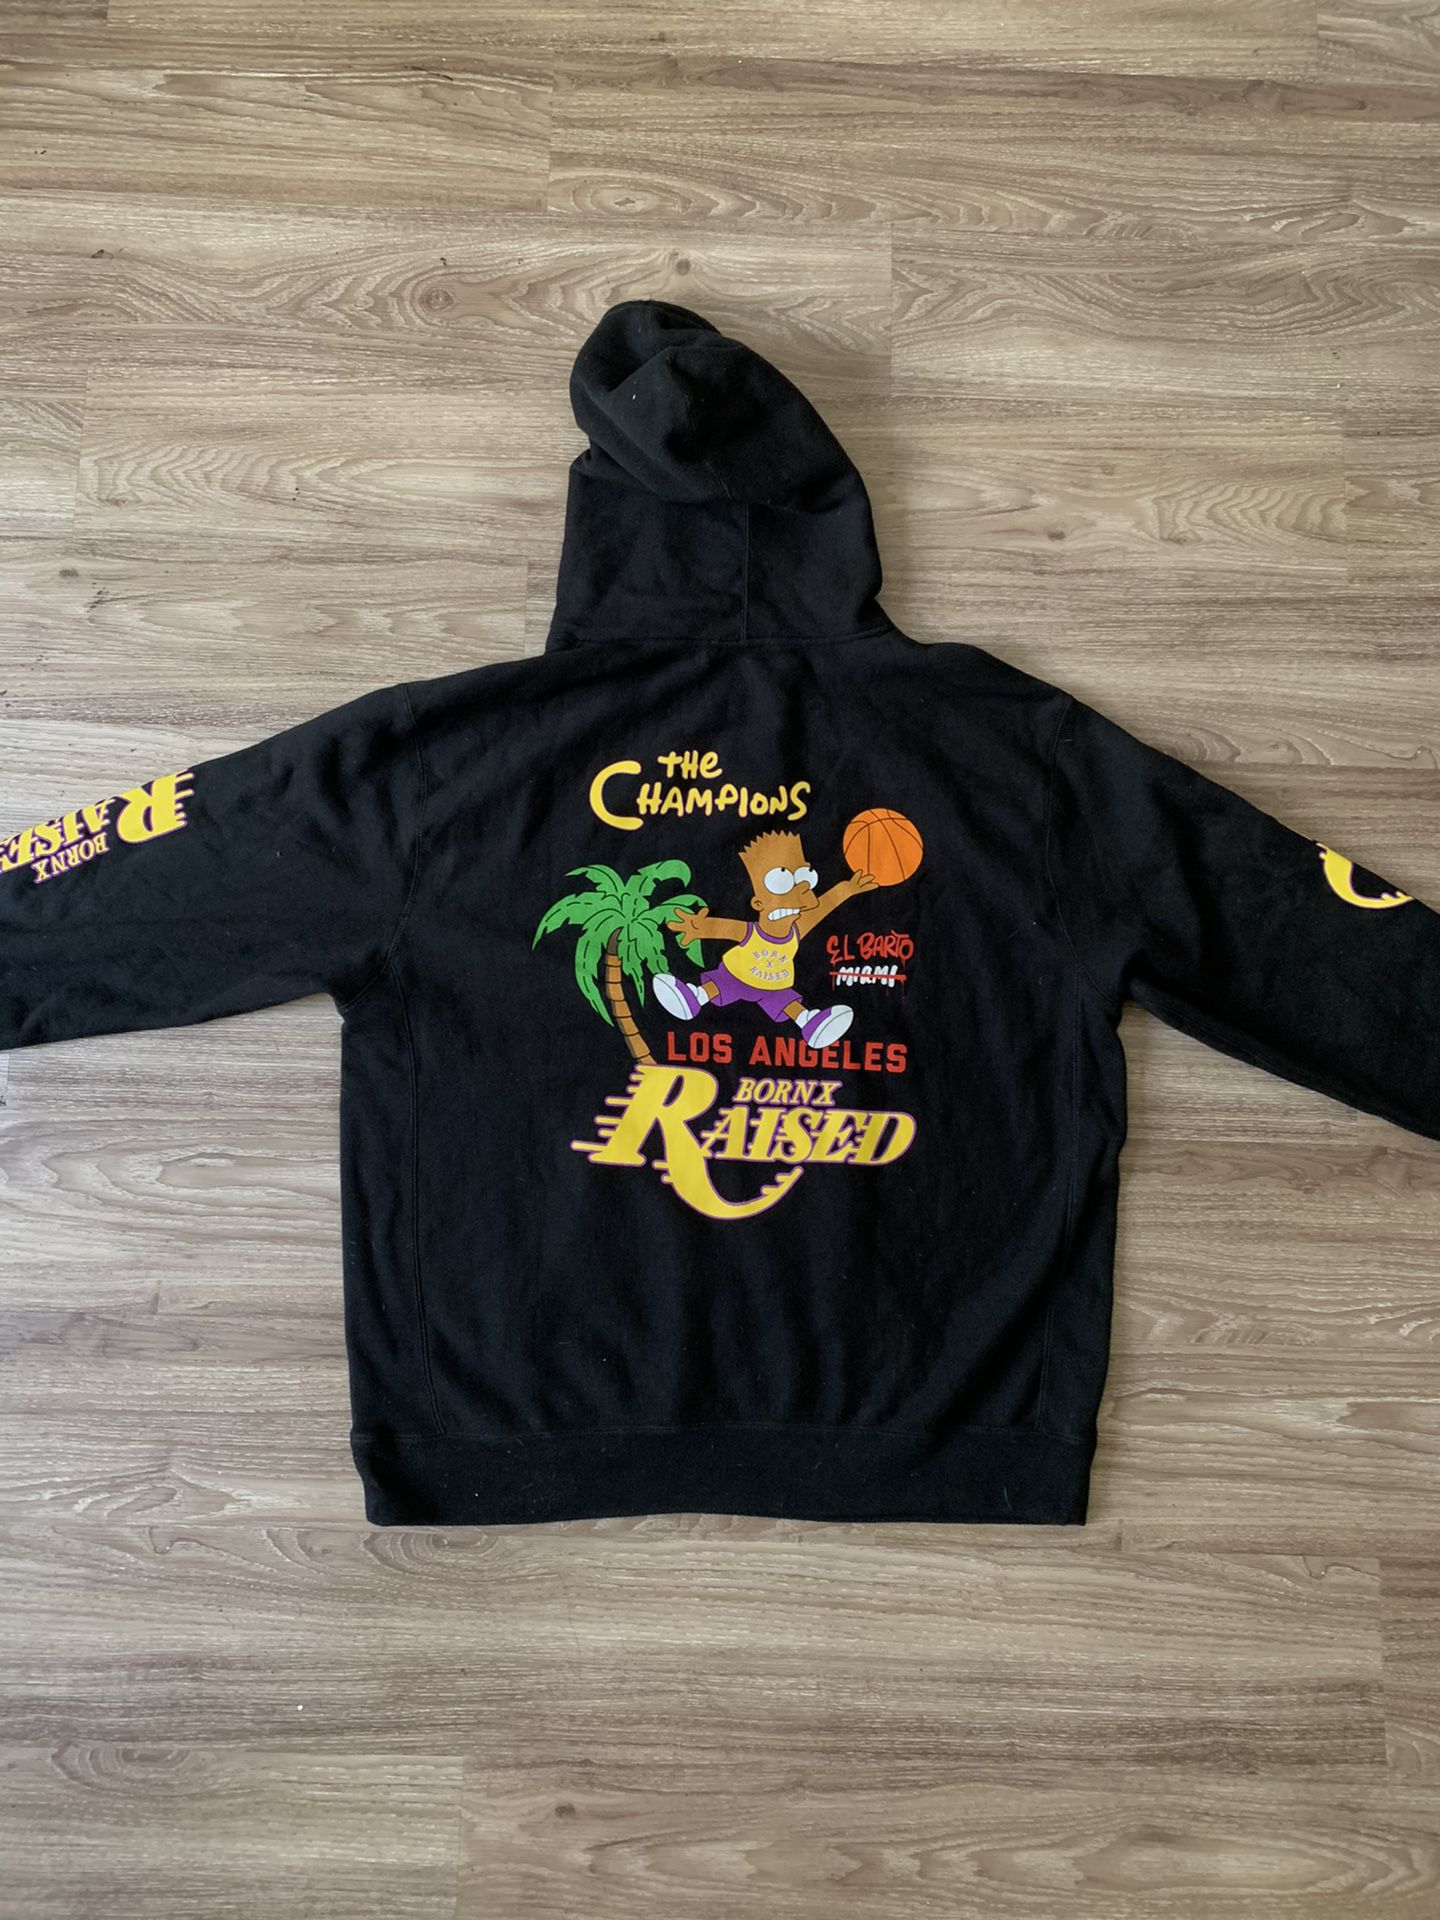 Born X Raised Lakers Bart Simpson Hoodie 3XL for Sale in Los